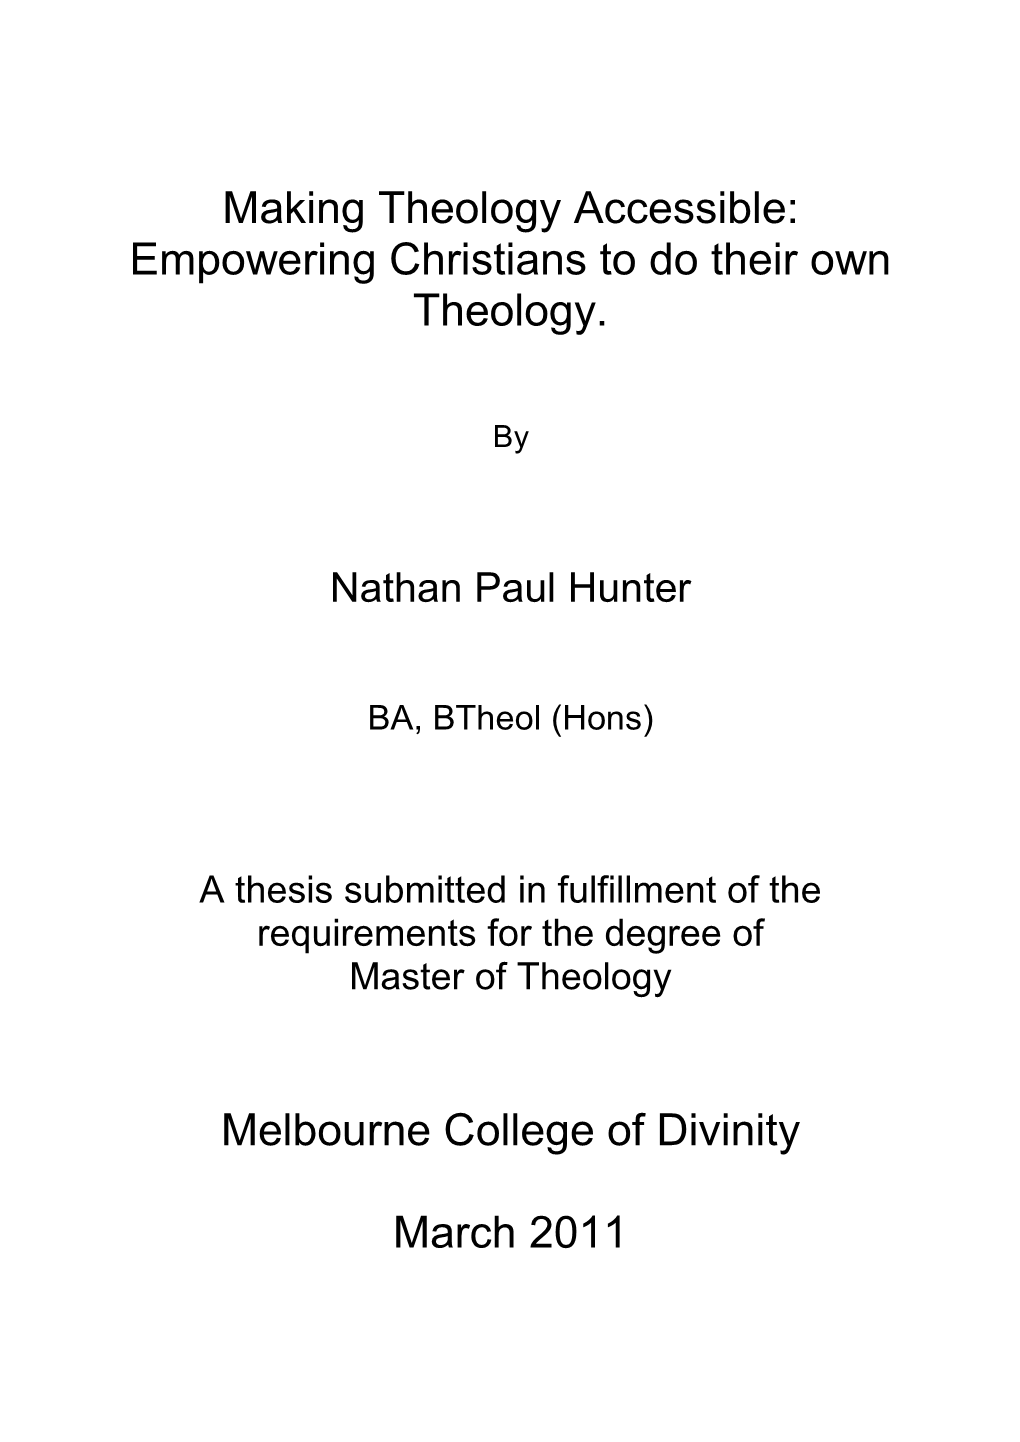 Making Theology Accessible: Empowering Christians to Do Their Own Theology